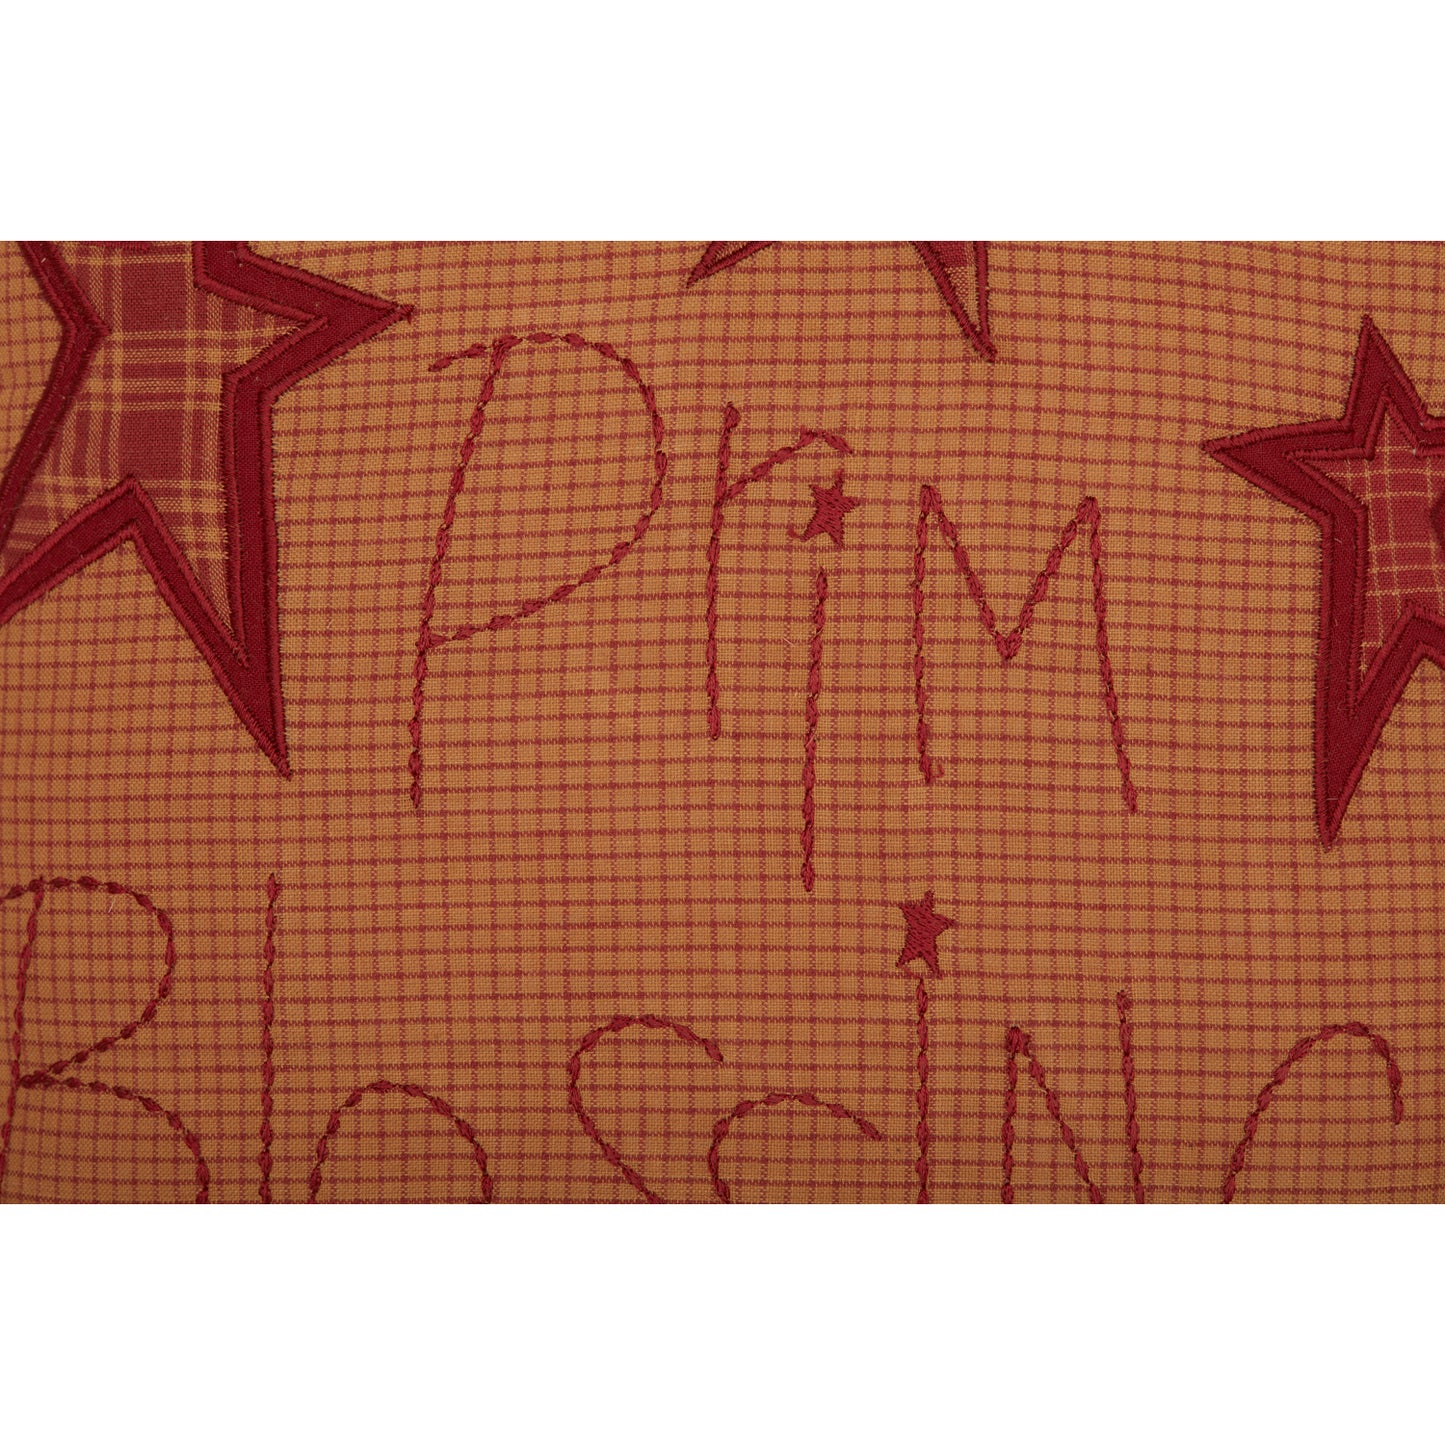 56743-Ninepatch-Star-Prim-Blessings-Pillow-12x12-image-6